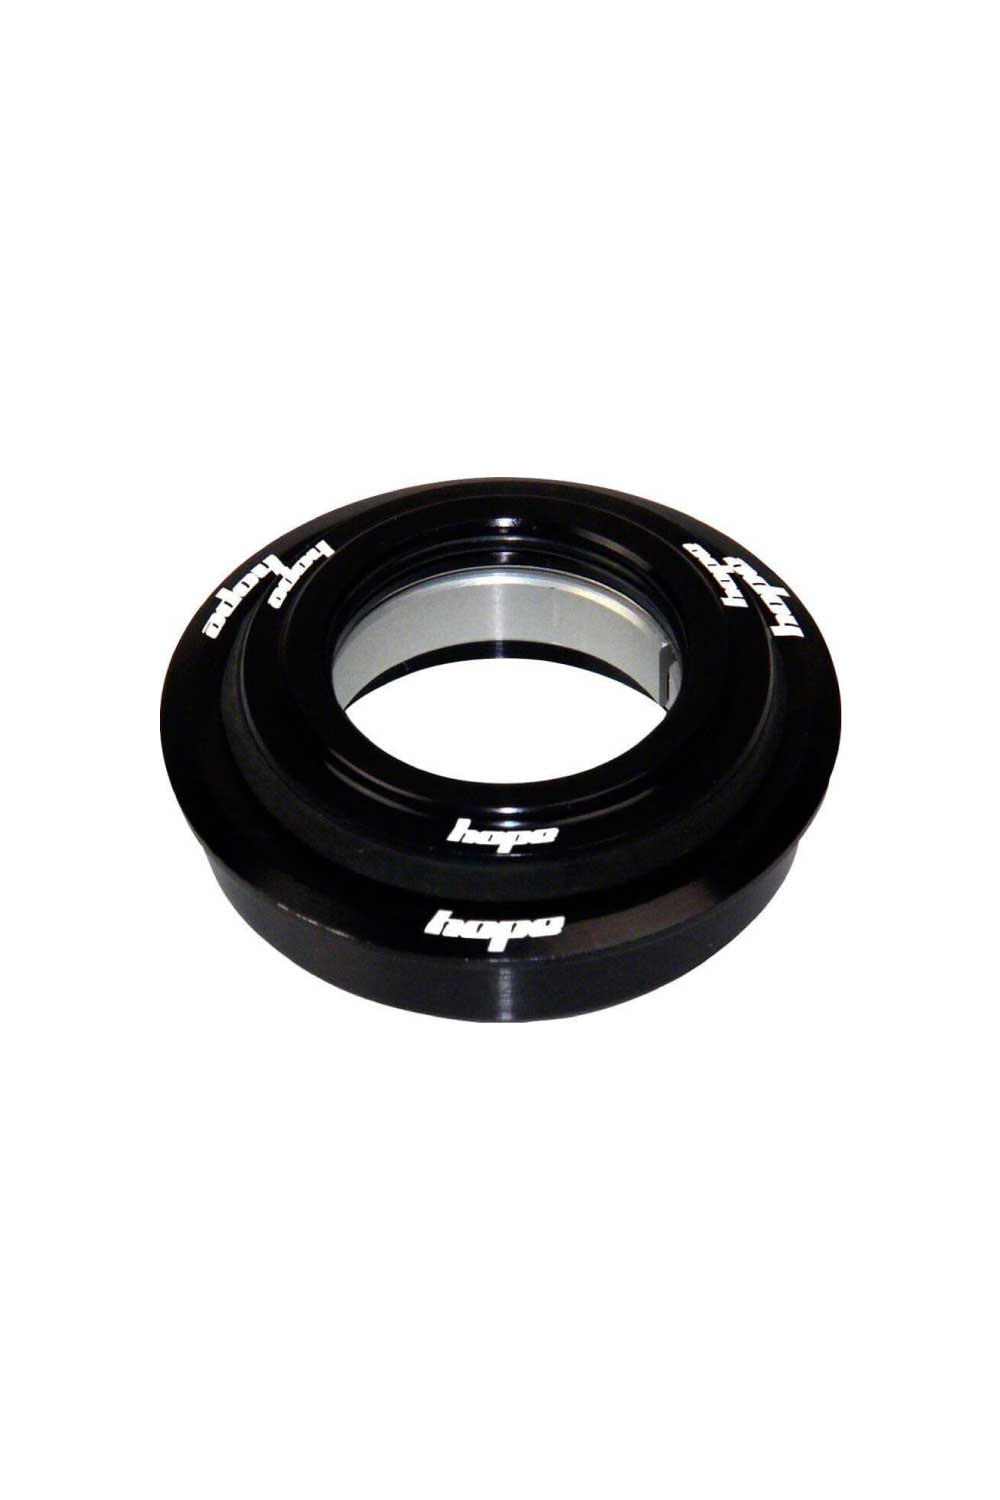 HOPE Pick N Mix Upper Headset Assembly Top